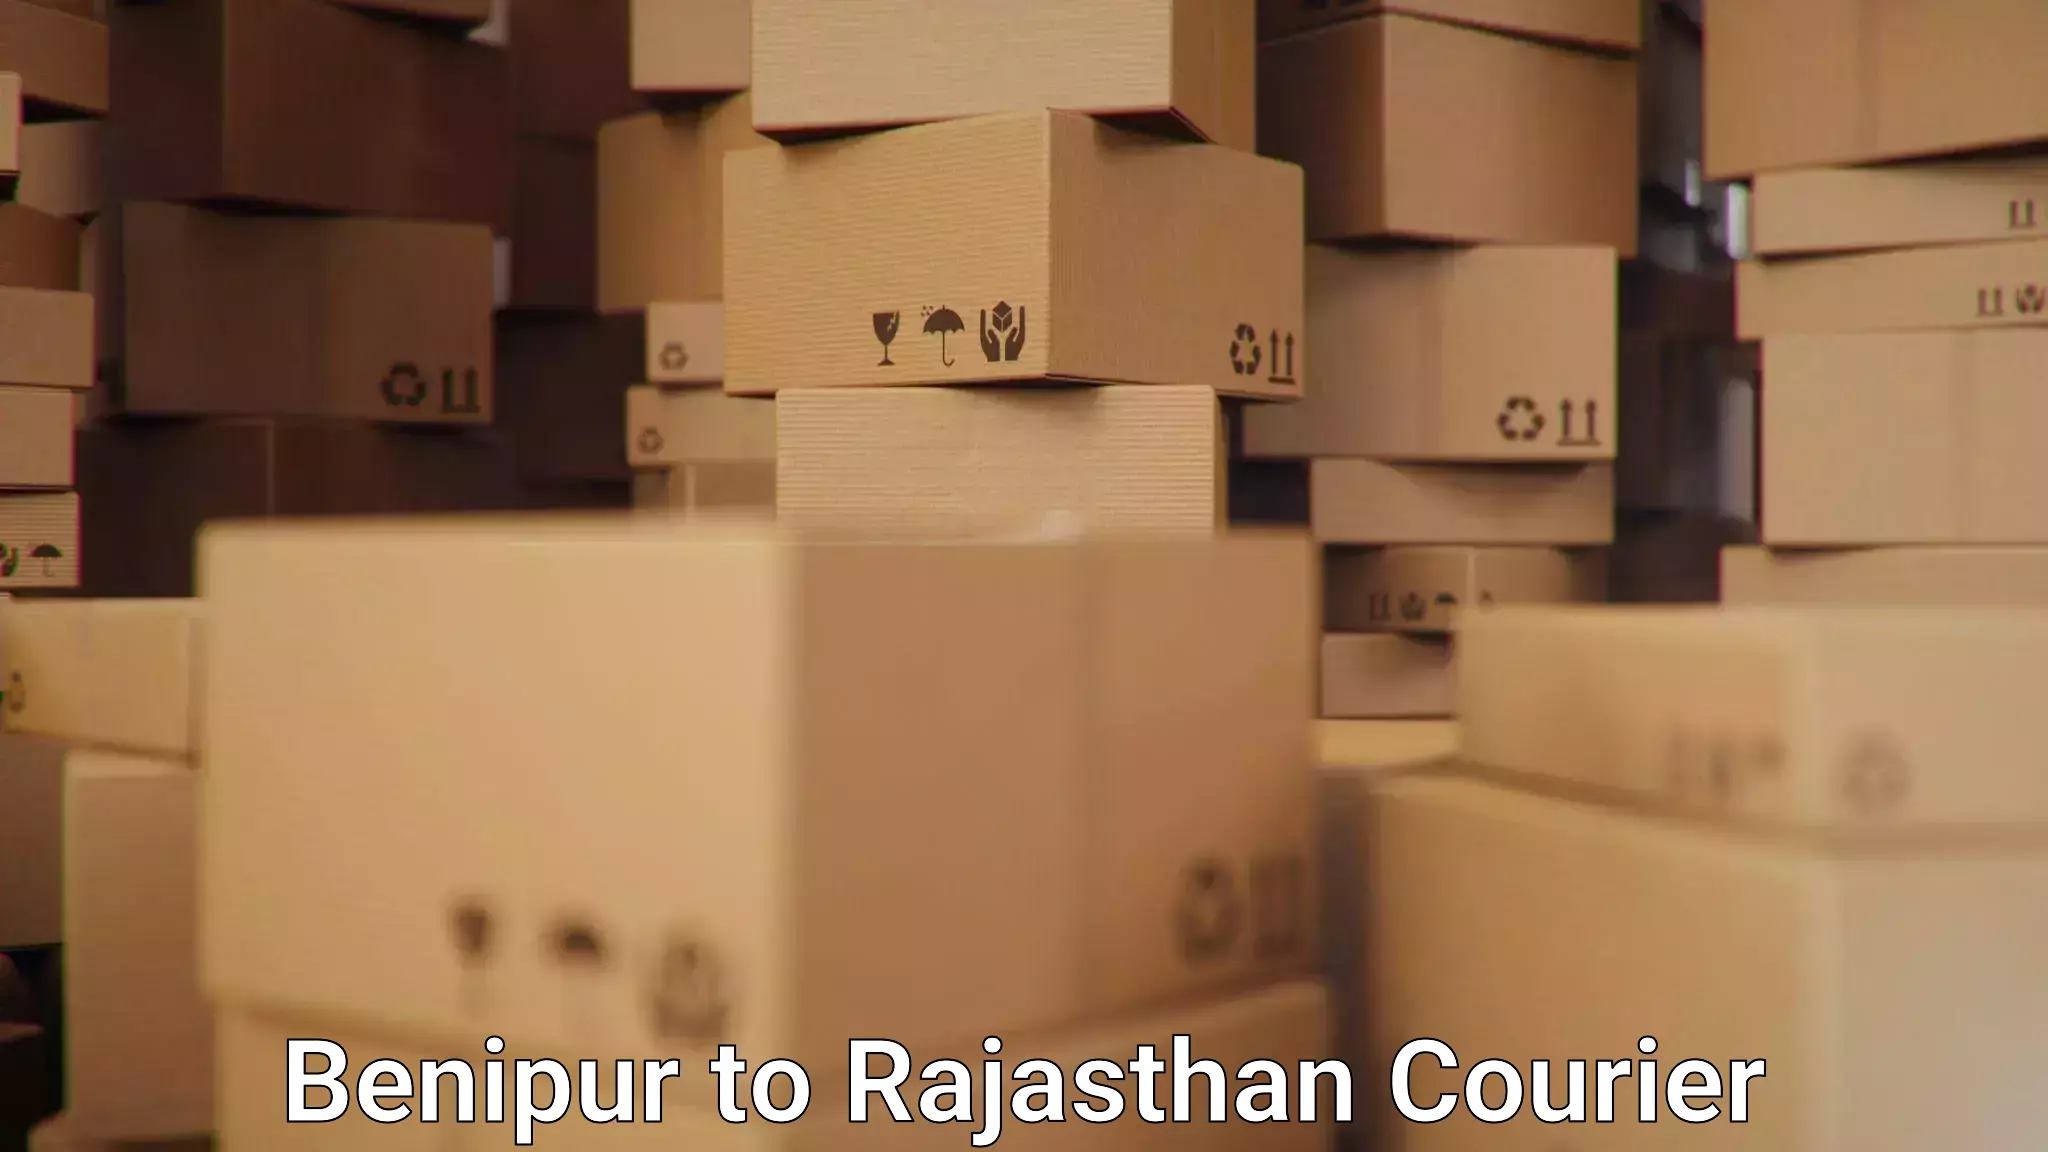 Easy access courier services Benipur to Sirohi